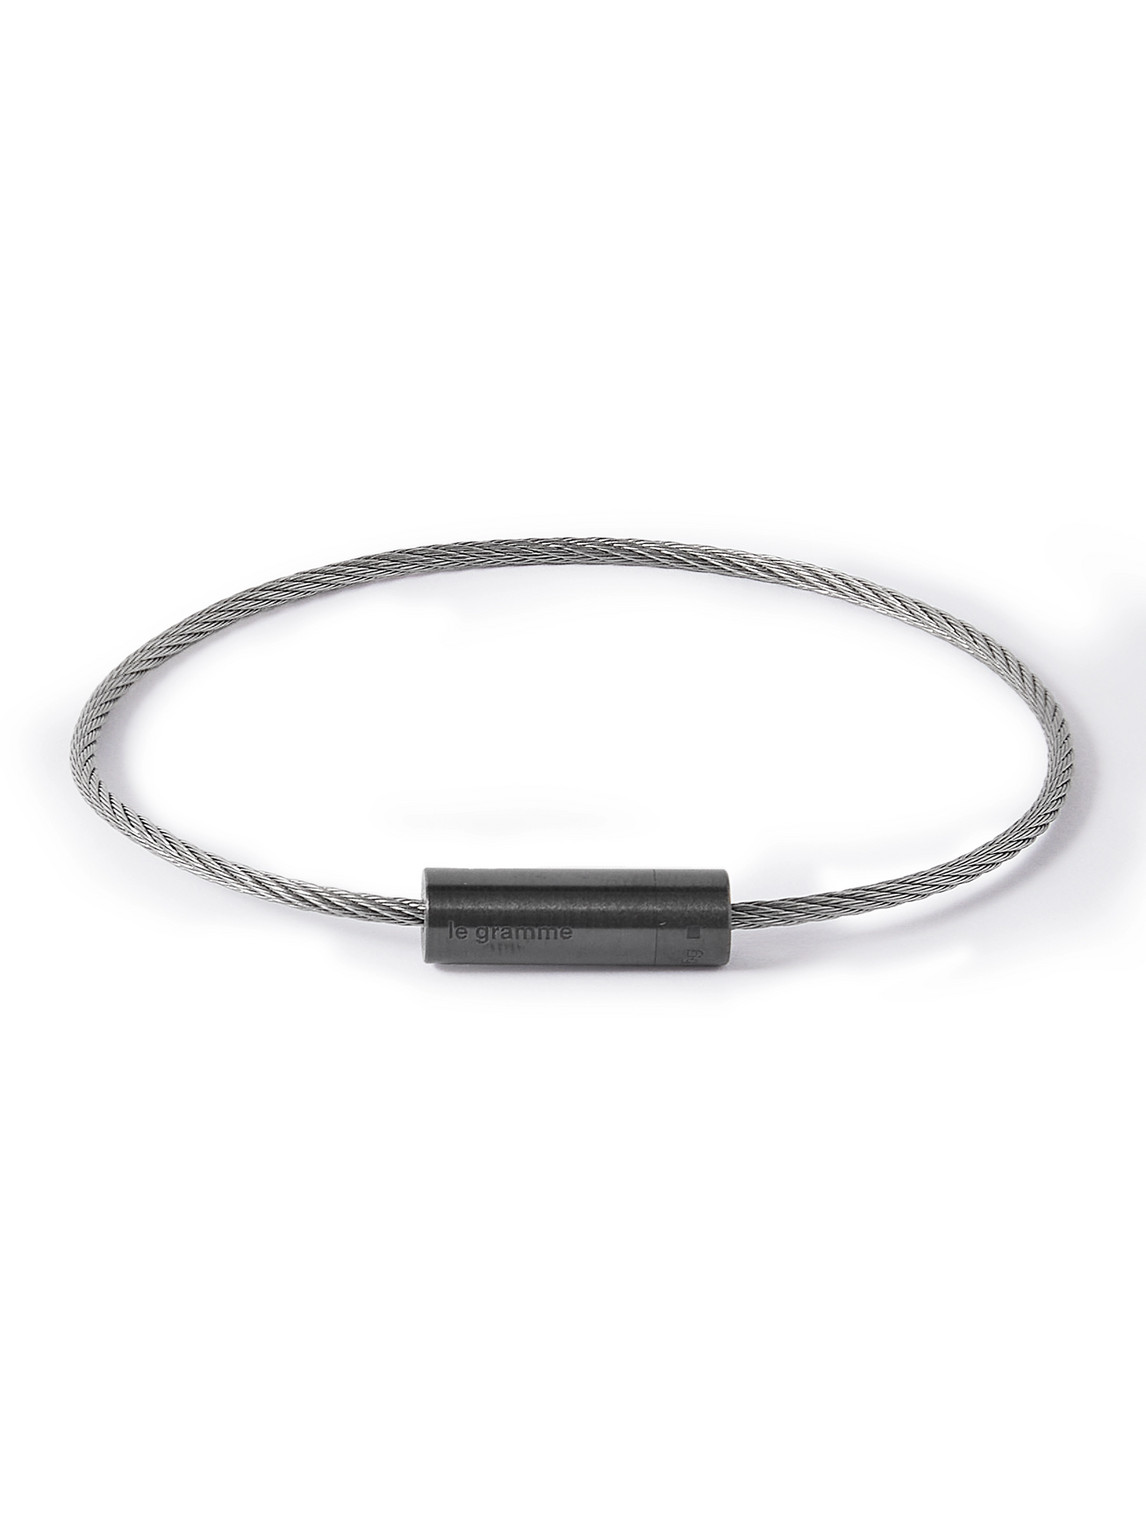 Le Gramme 5g Brushed Recycled Sterling Silver And Ceramic Bracelet In Black